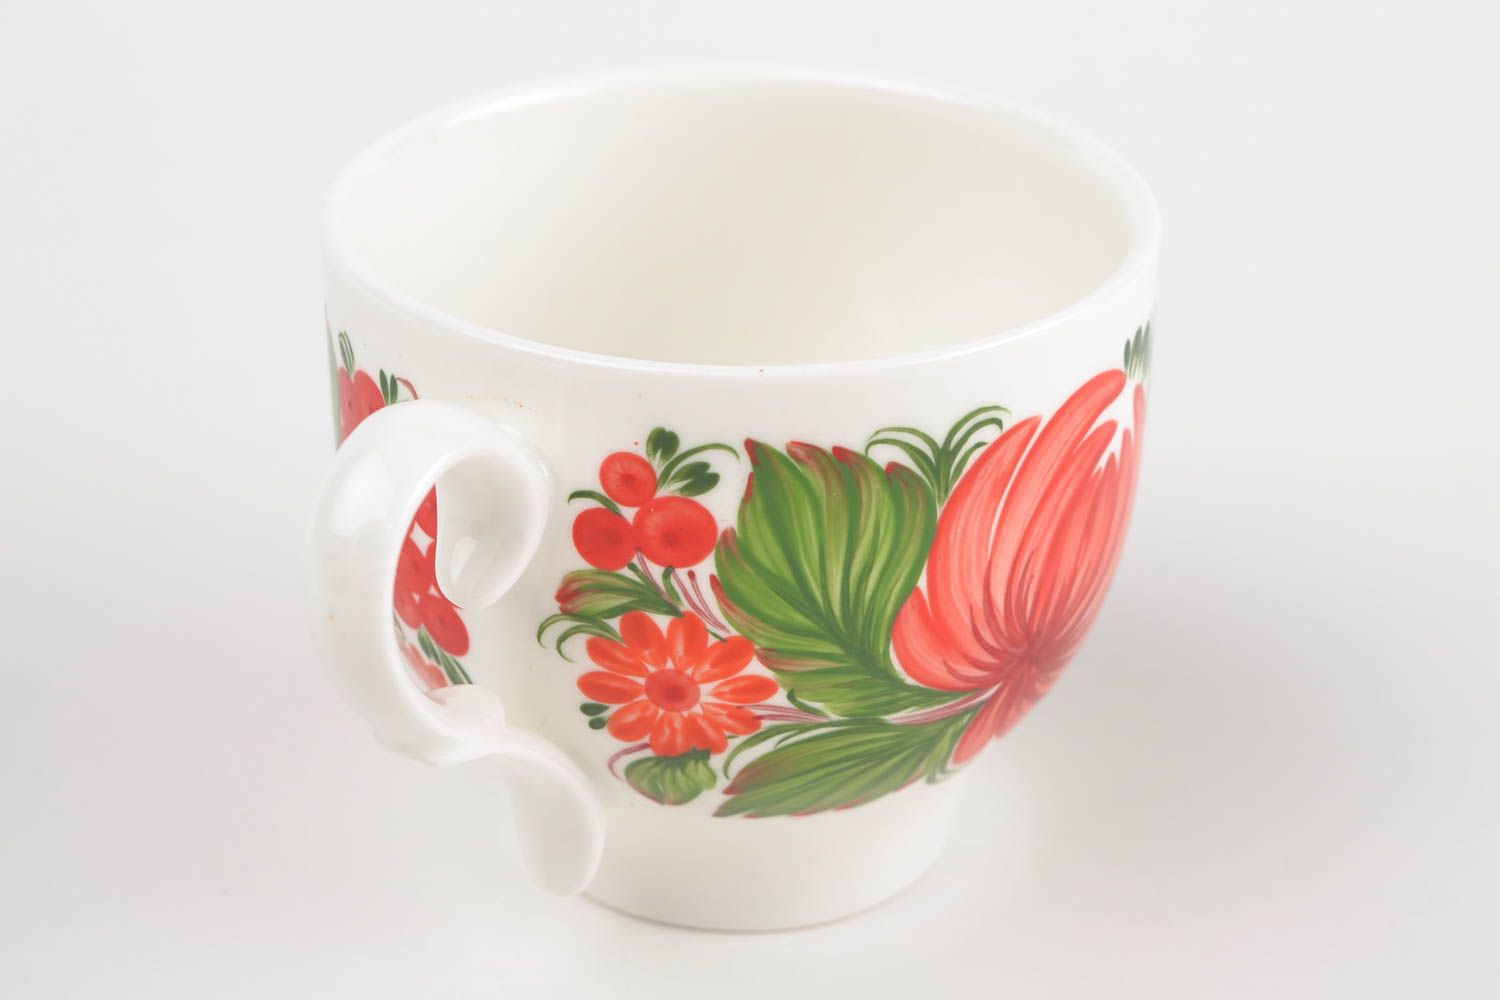 8 oz ceramic porcelain cup in white, red, and green color with handle and Russian style pattern photo 4